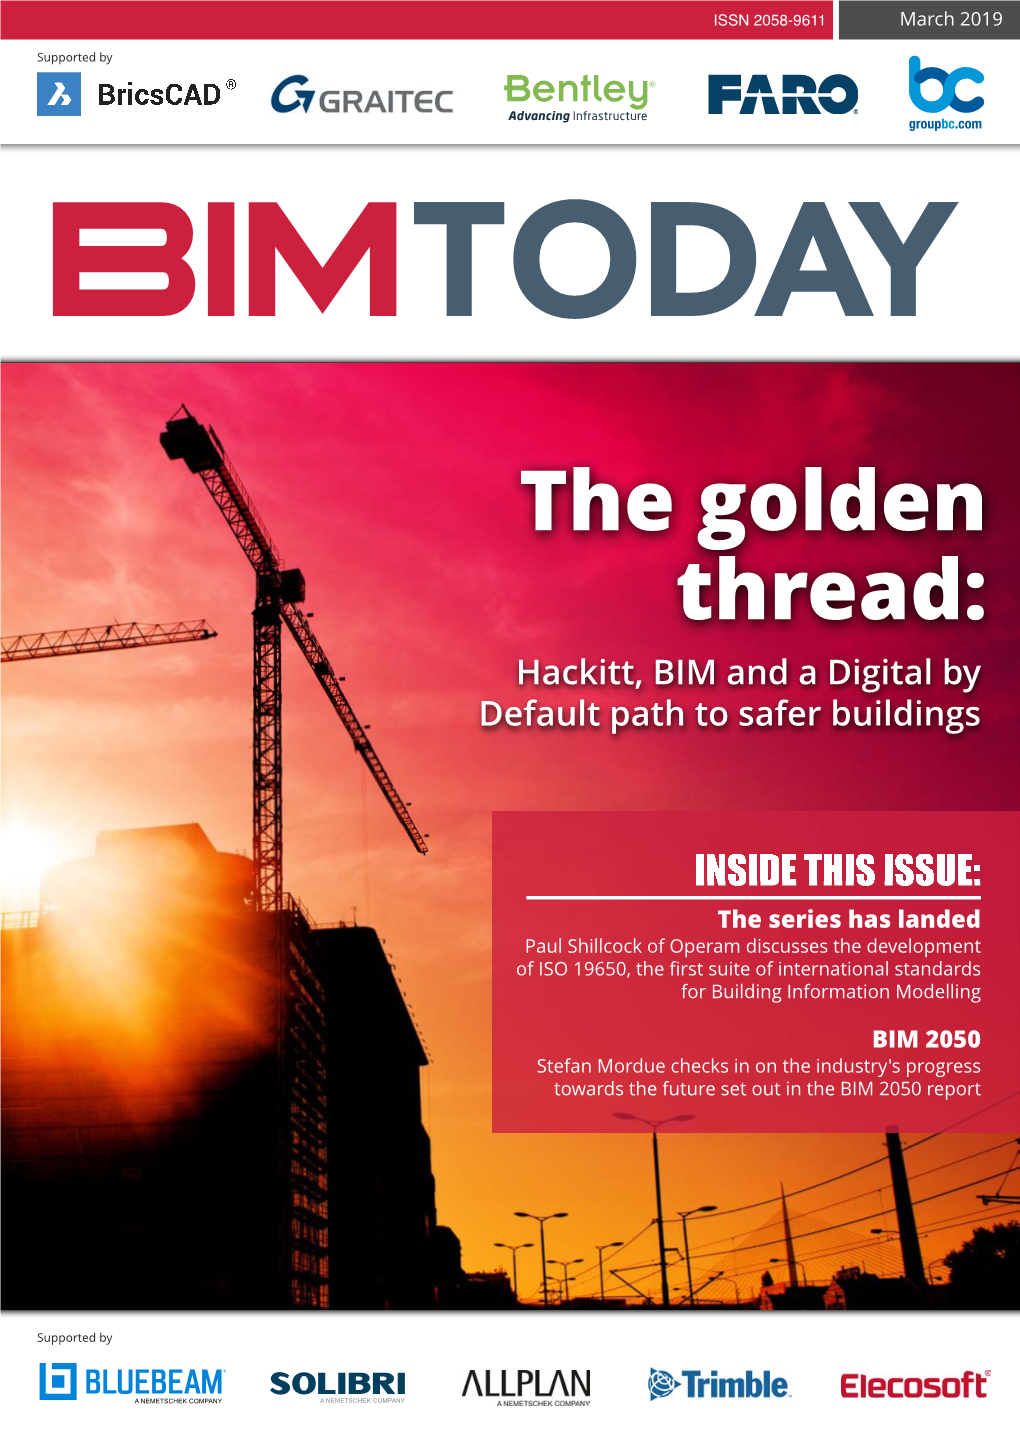 The Golden Thread: Hackitt, BIM and a Digital by Default Path to Safer Buildings